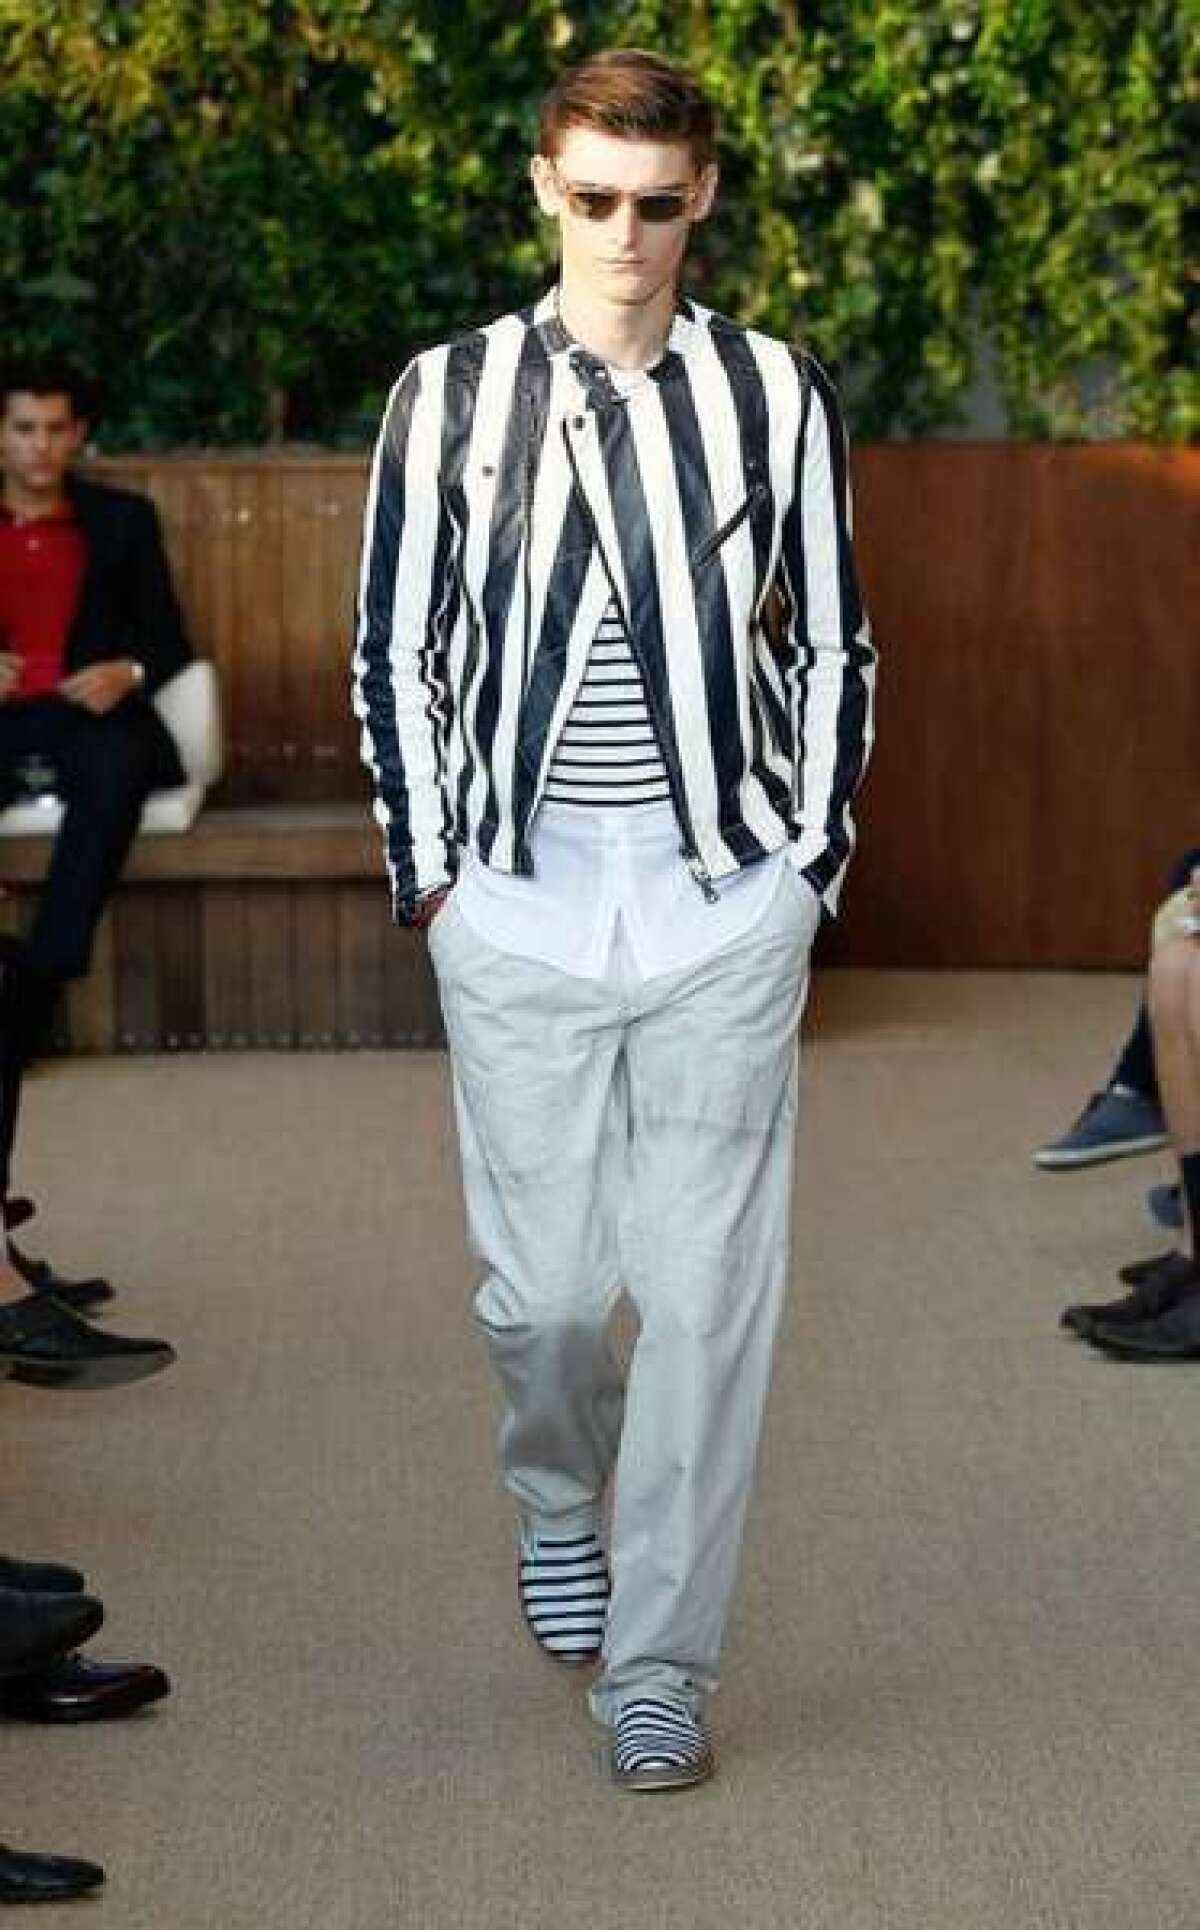 A look from the Tommy Hilfiger spring 2013 men's runway show during Mercedes-Benz New York Fashion Week. The label has decided not to stage a men's runway show in September.